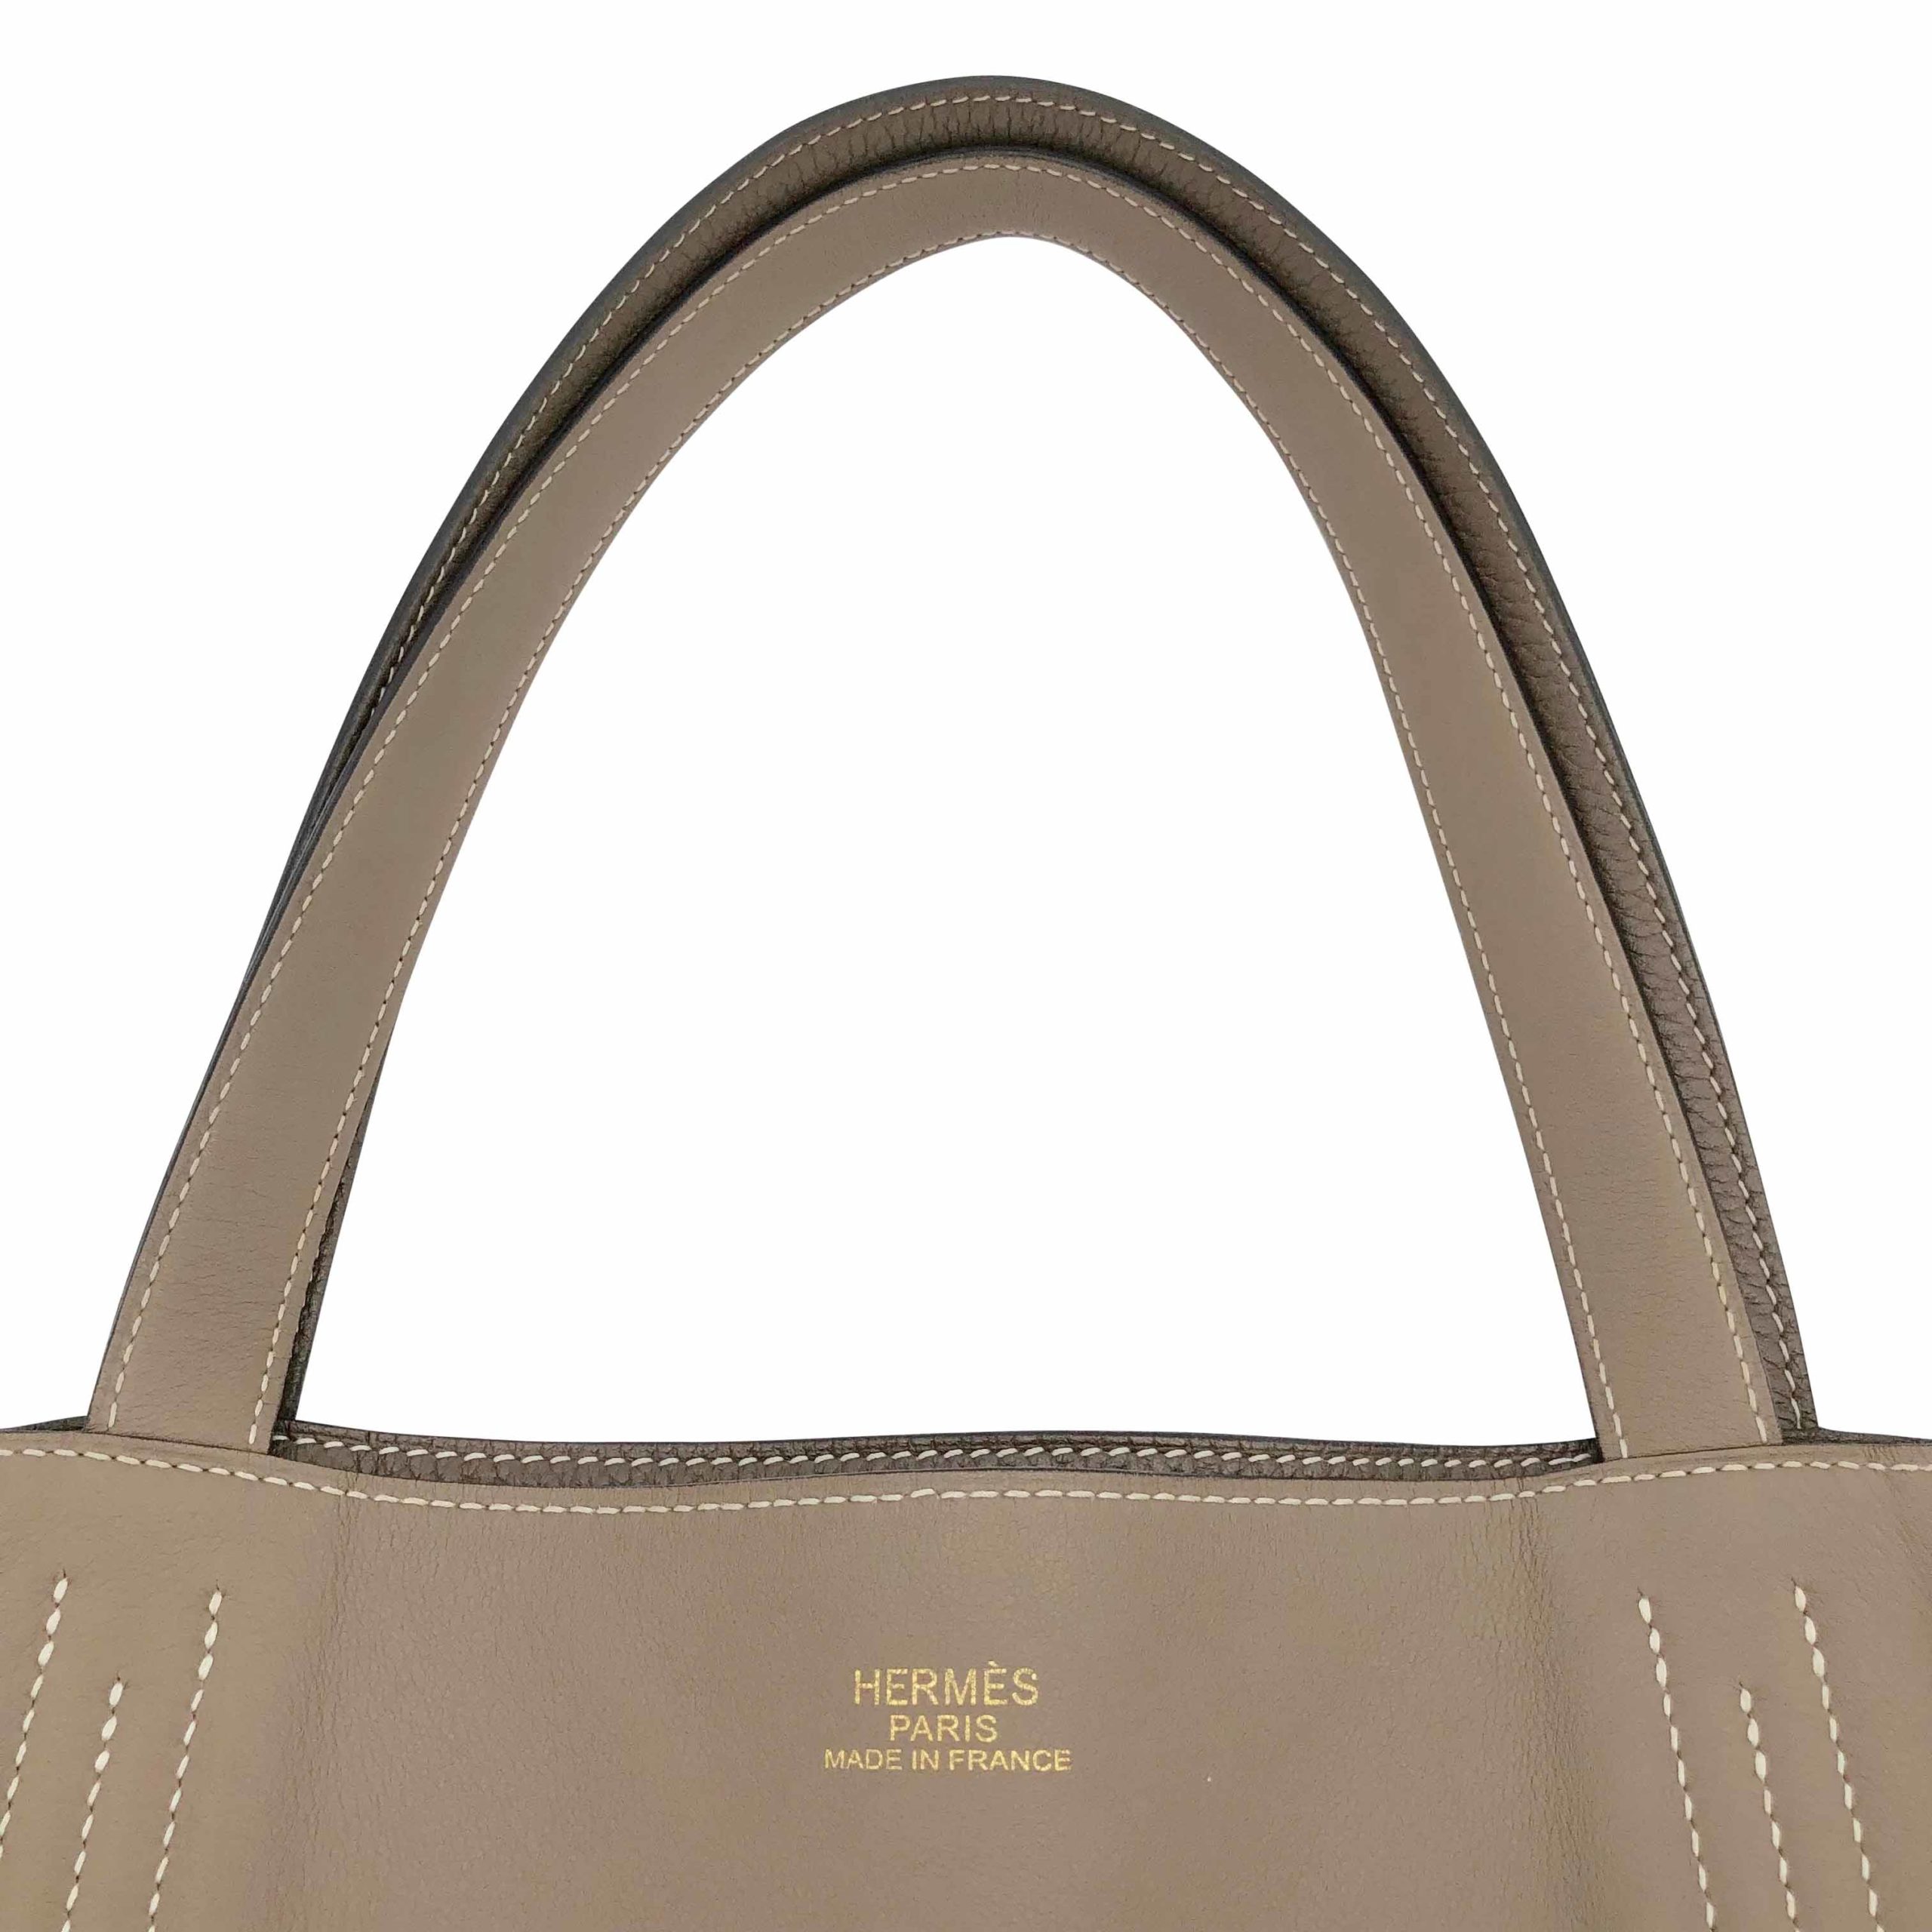 Hermès Double Sens L.E. bag in taupe leather - DOWNTOWN UPTOWN Genève